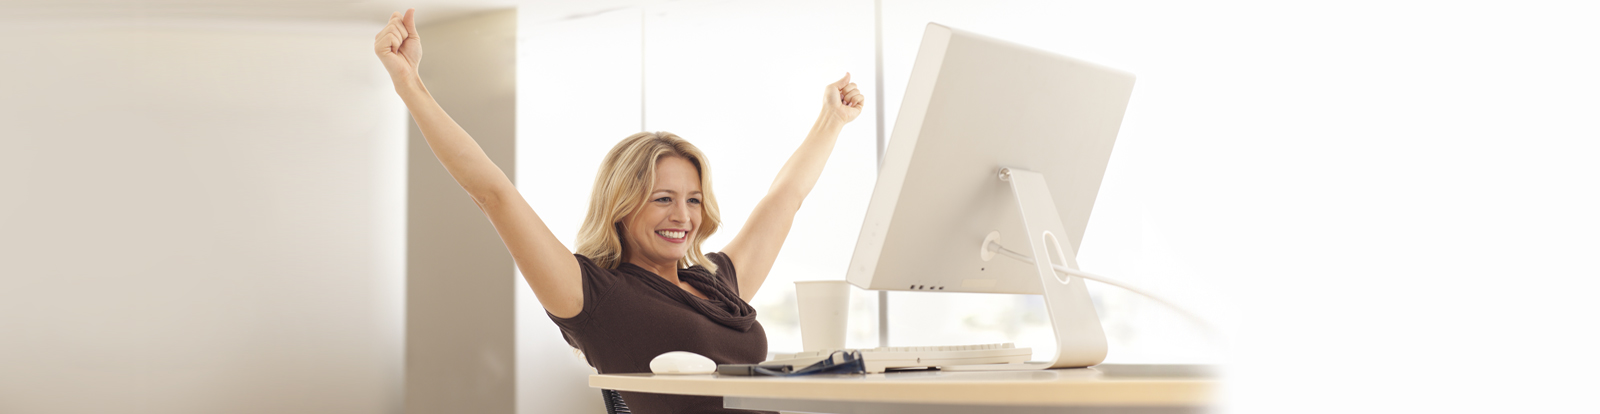 Woman smiling with arms outstretched sitting at laptop in brightly lit room.